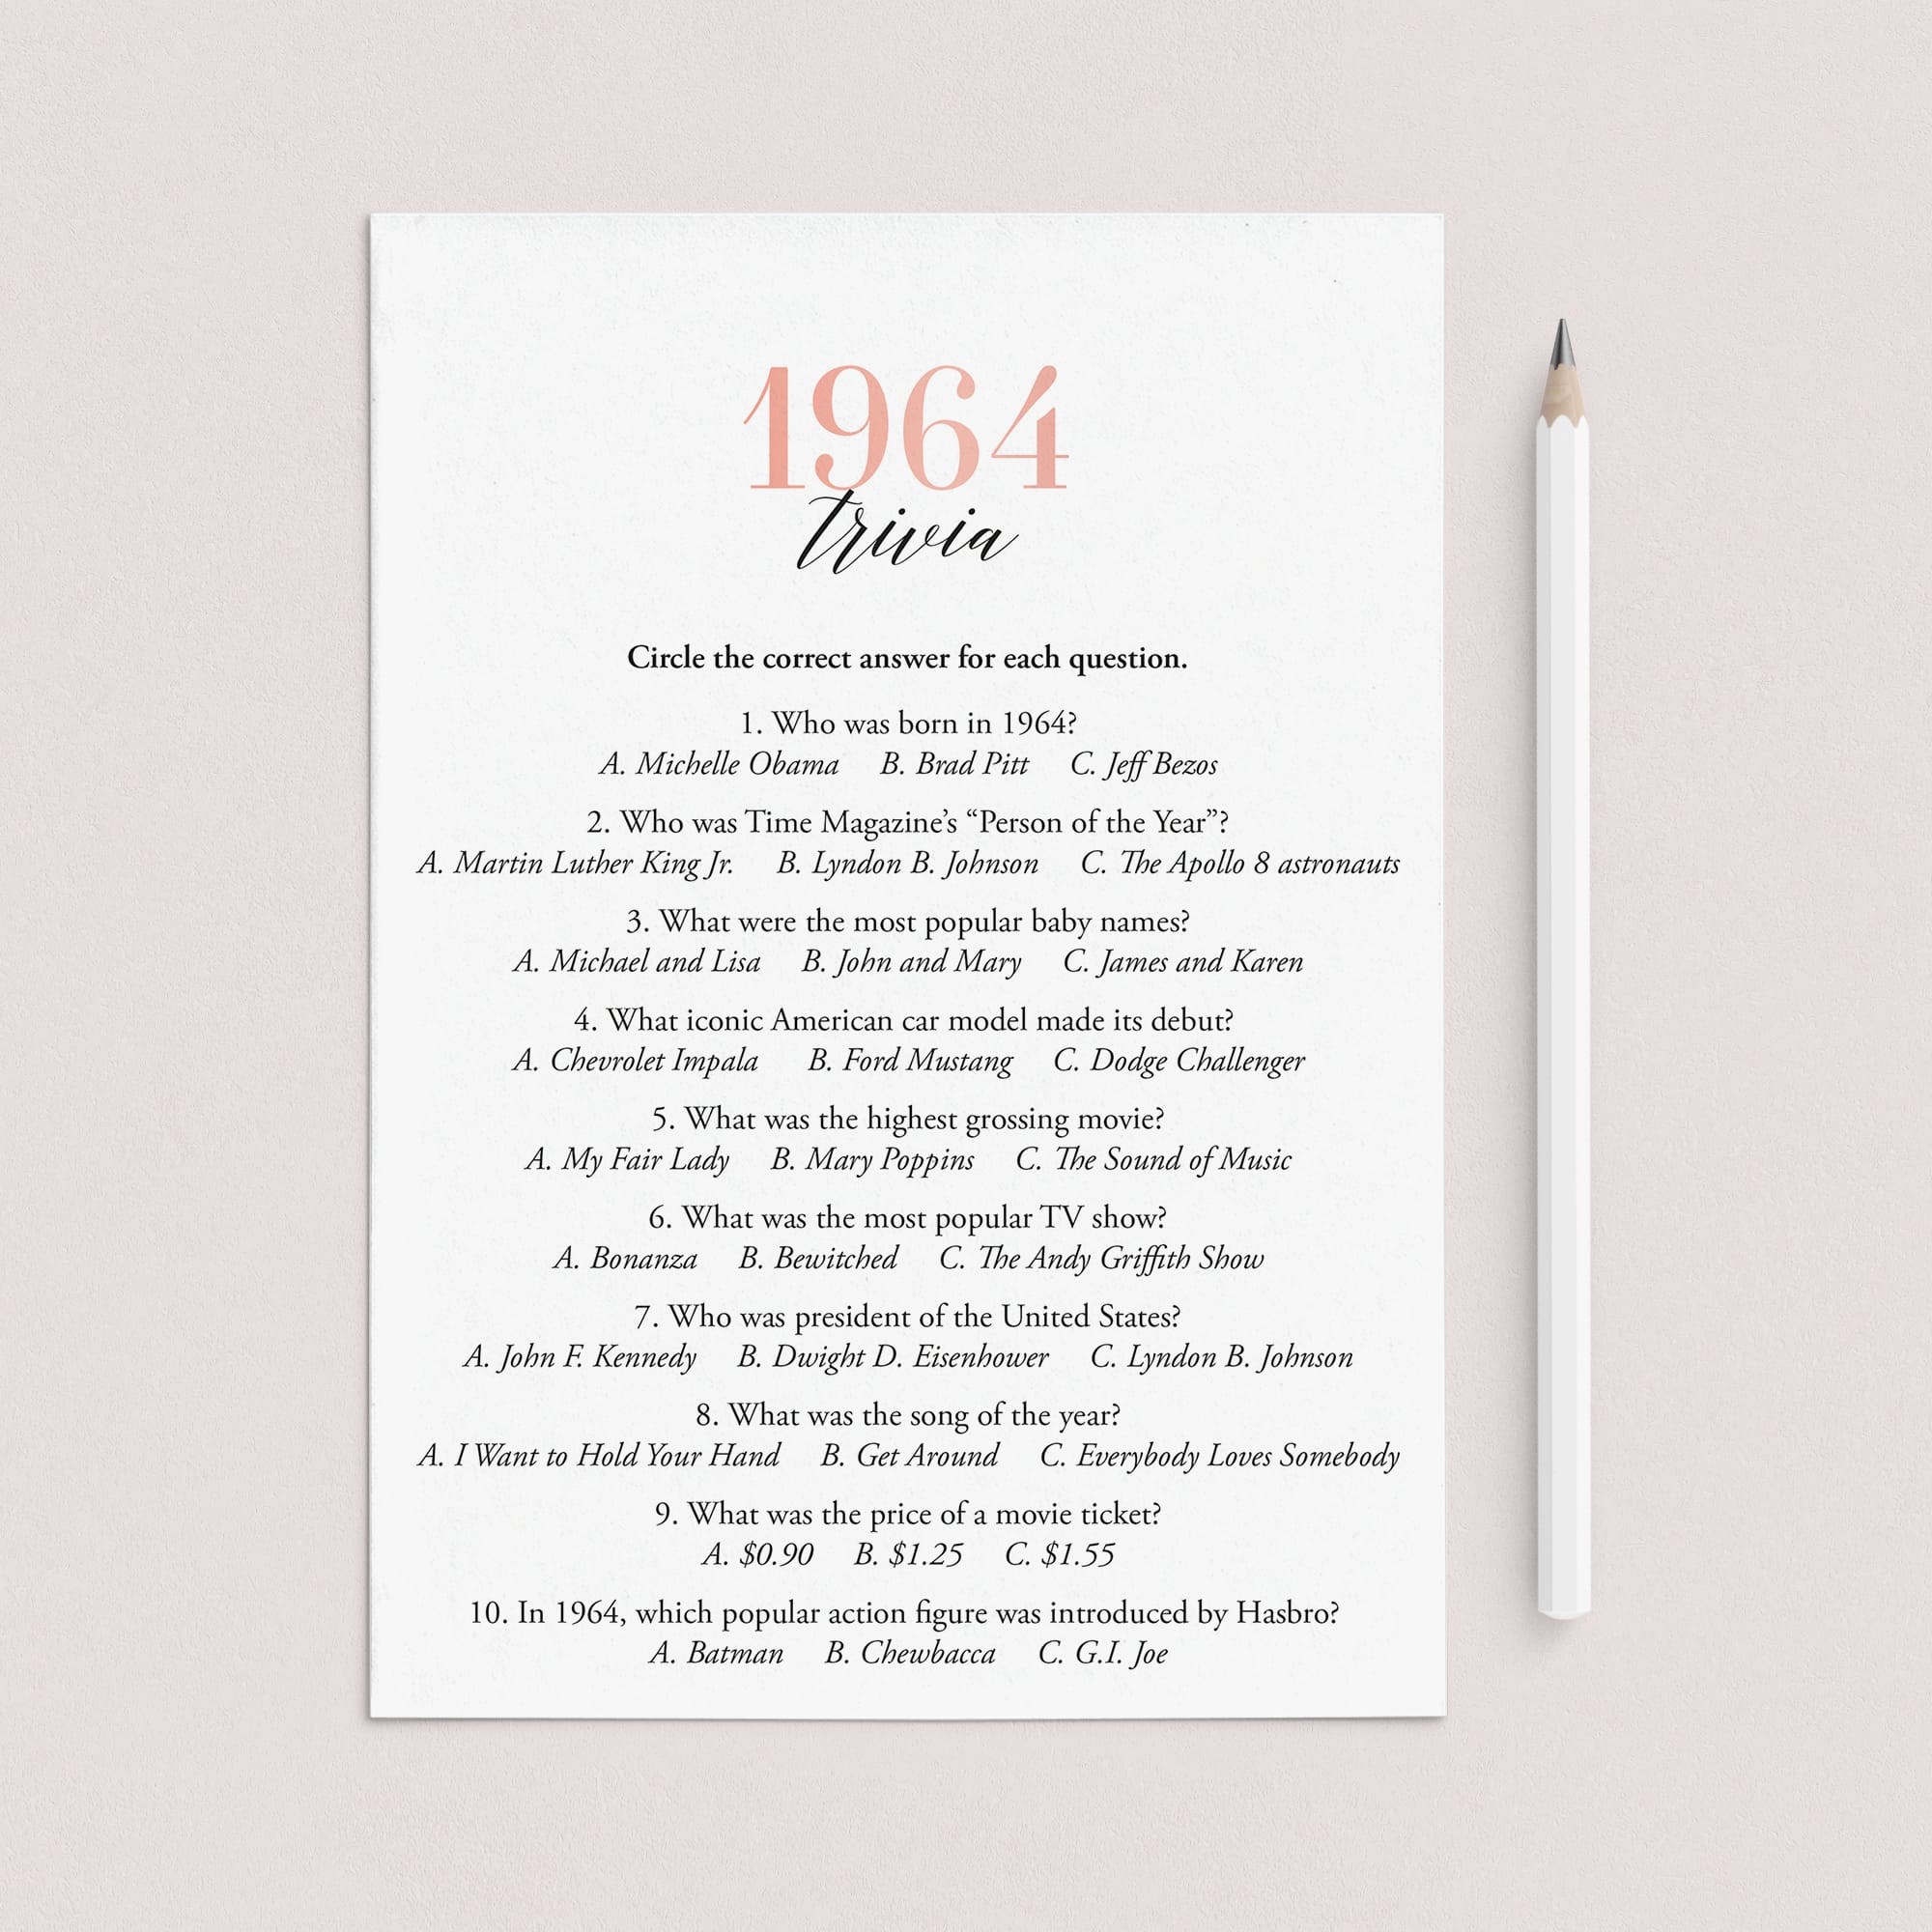 1964 Trivia Questions and Answers Printable by LittleSizzle